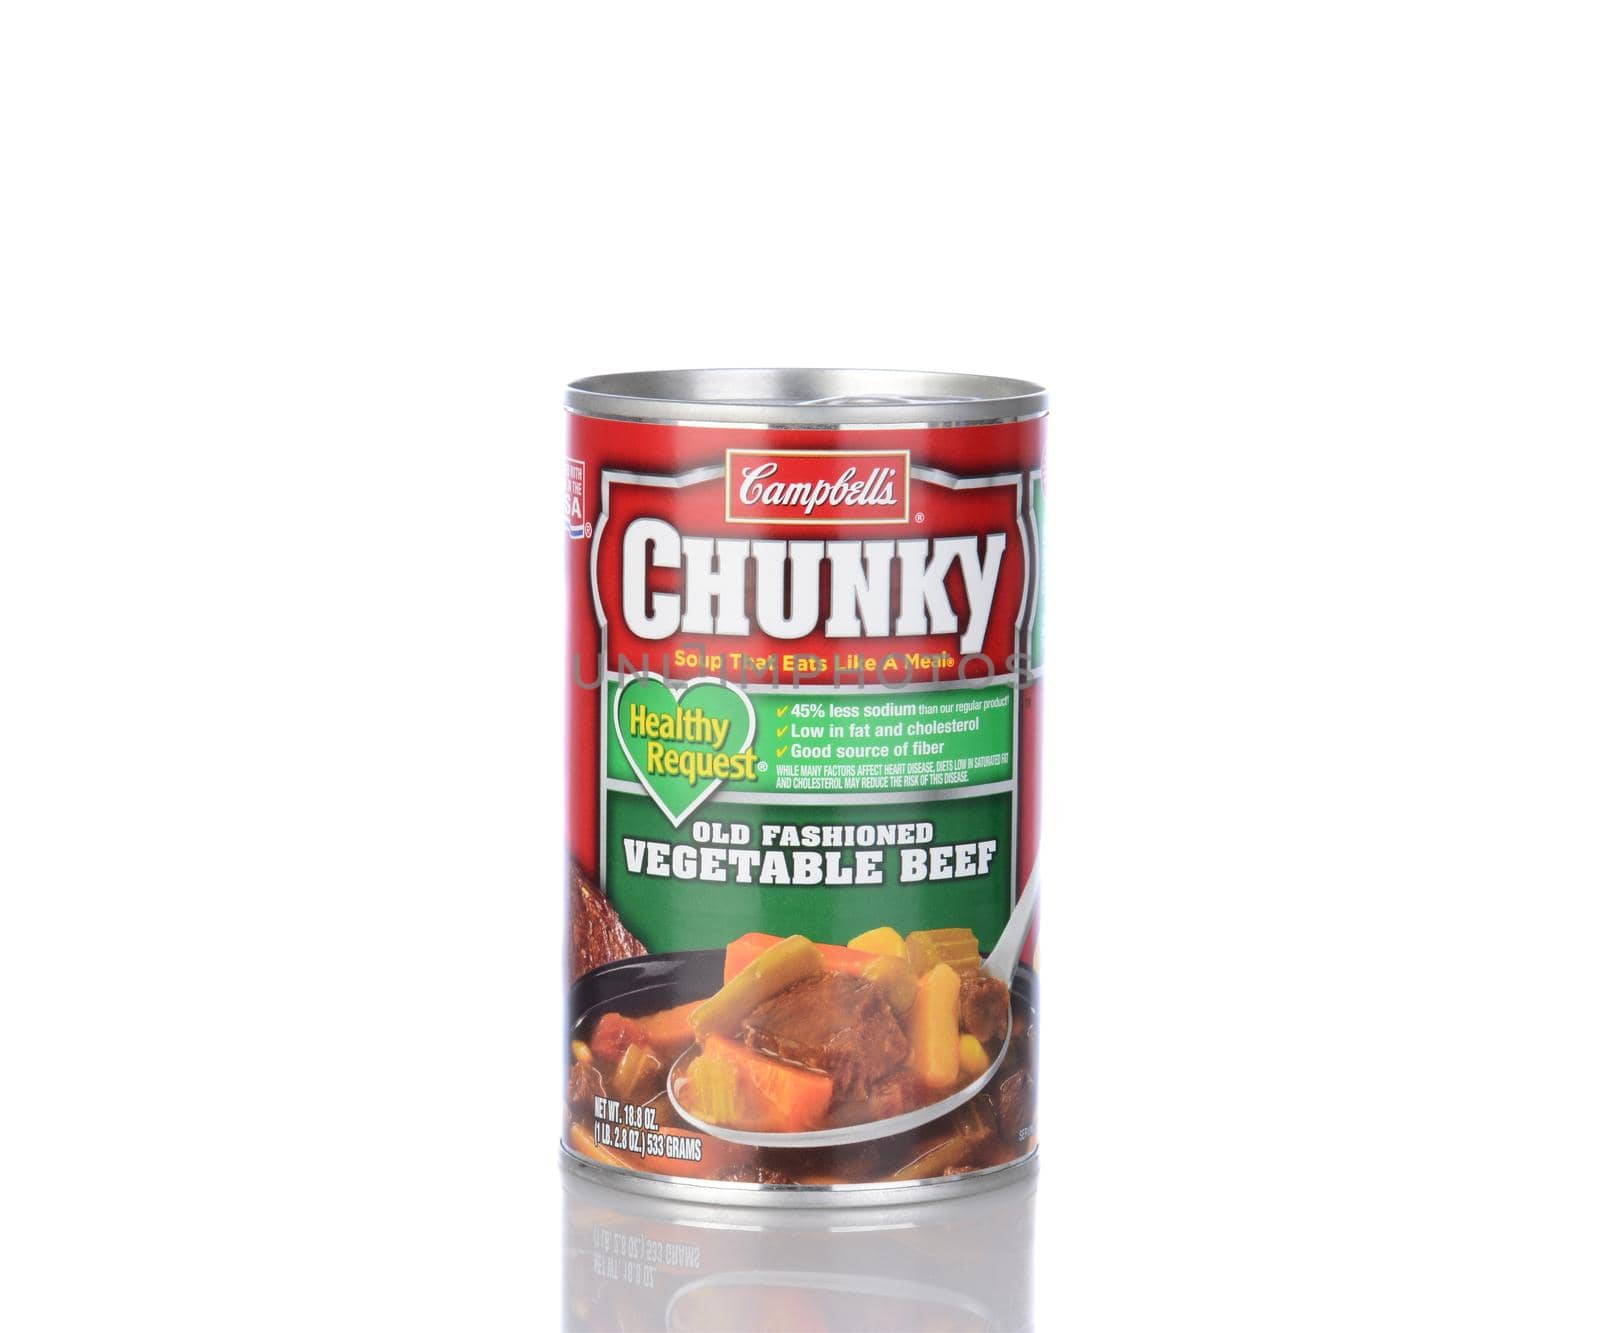 Campbells Chunky Vegetable Beef Soup by sCukrov